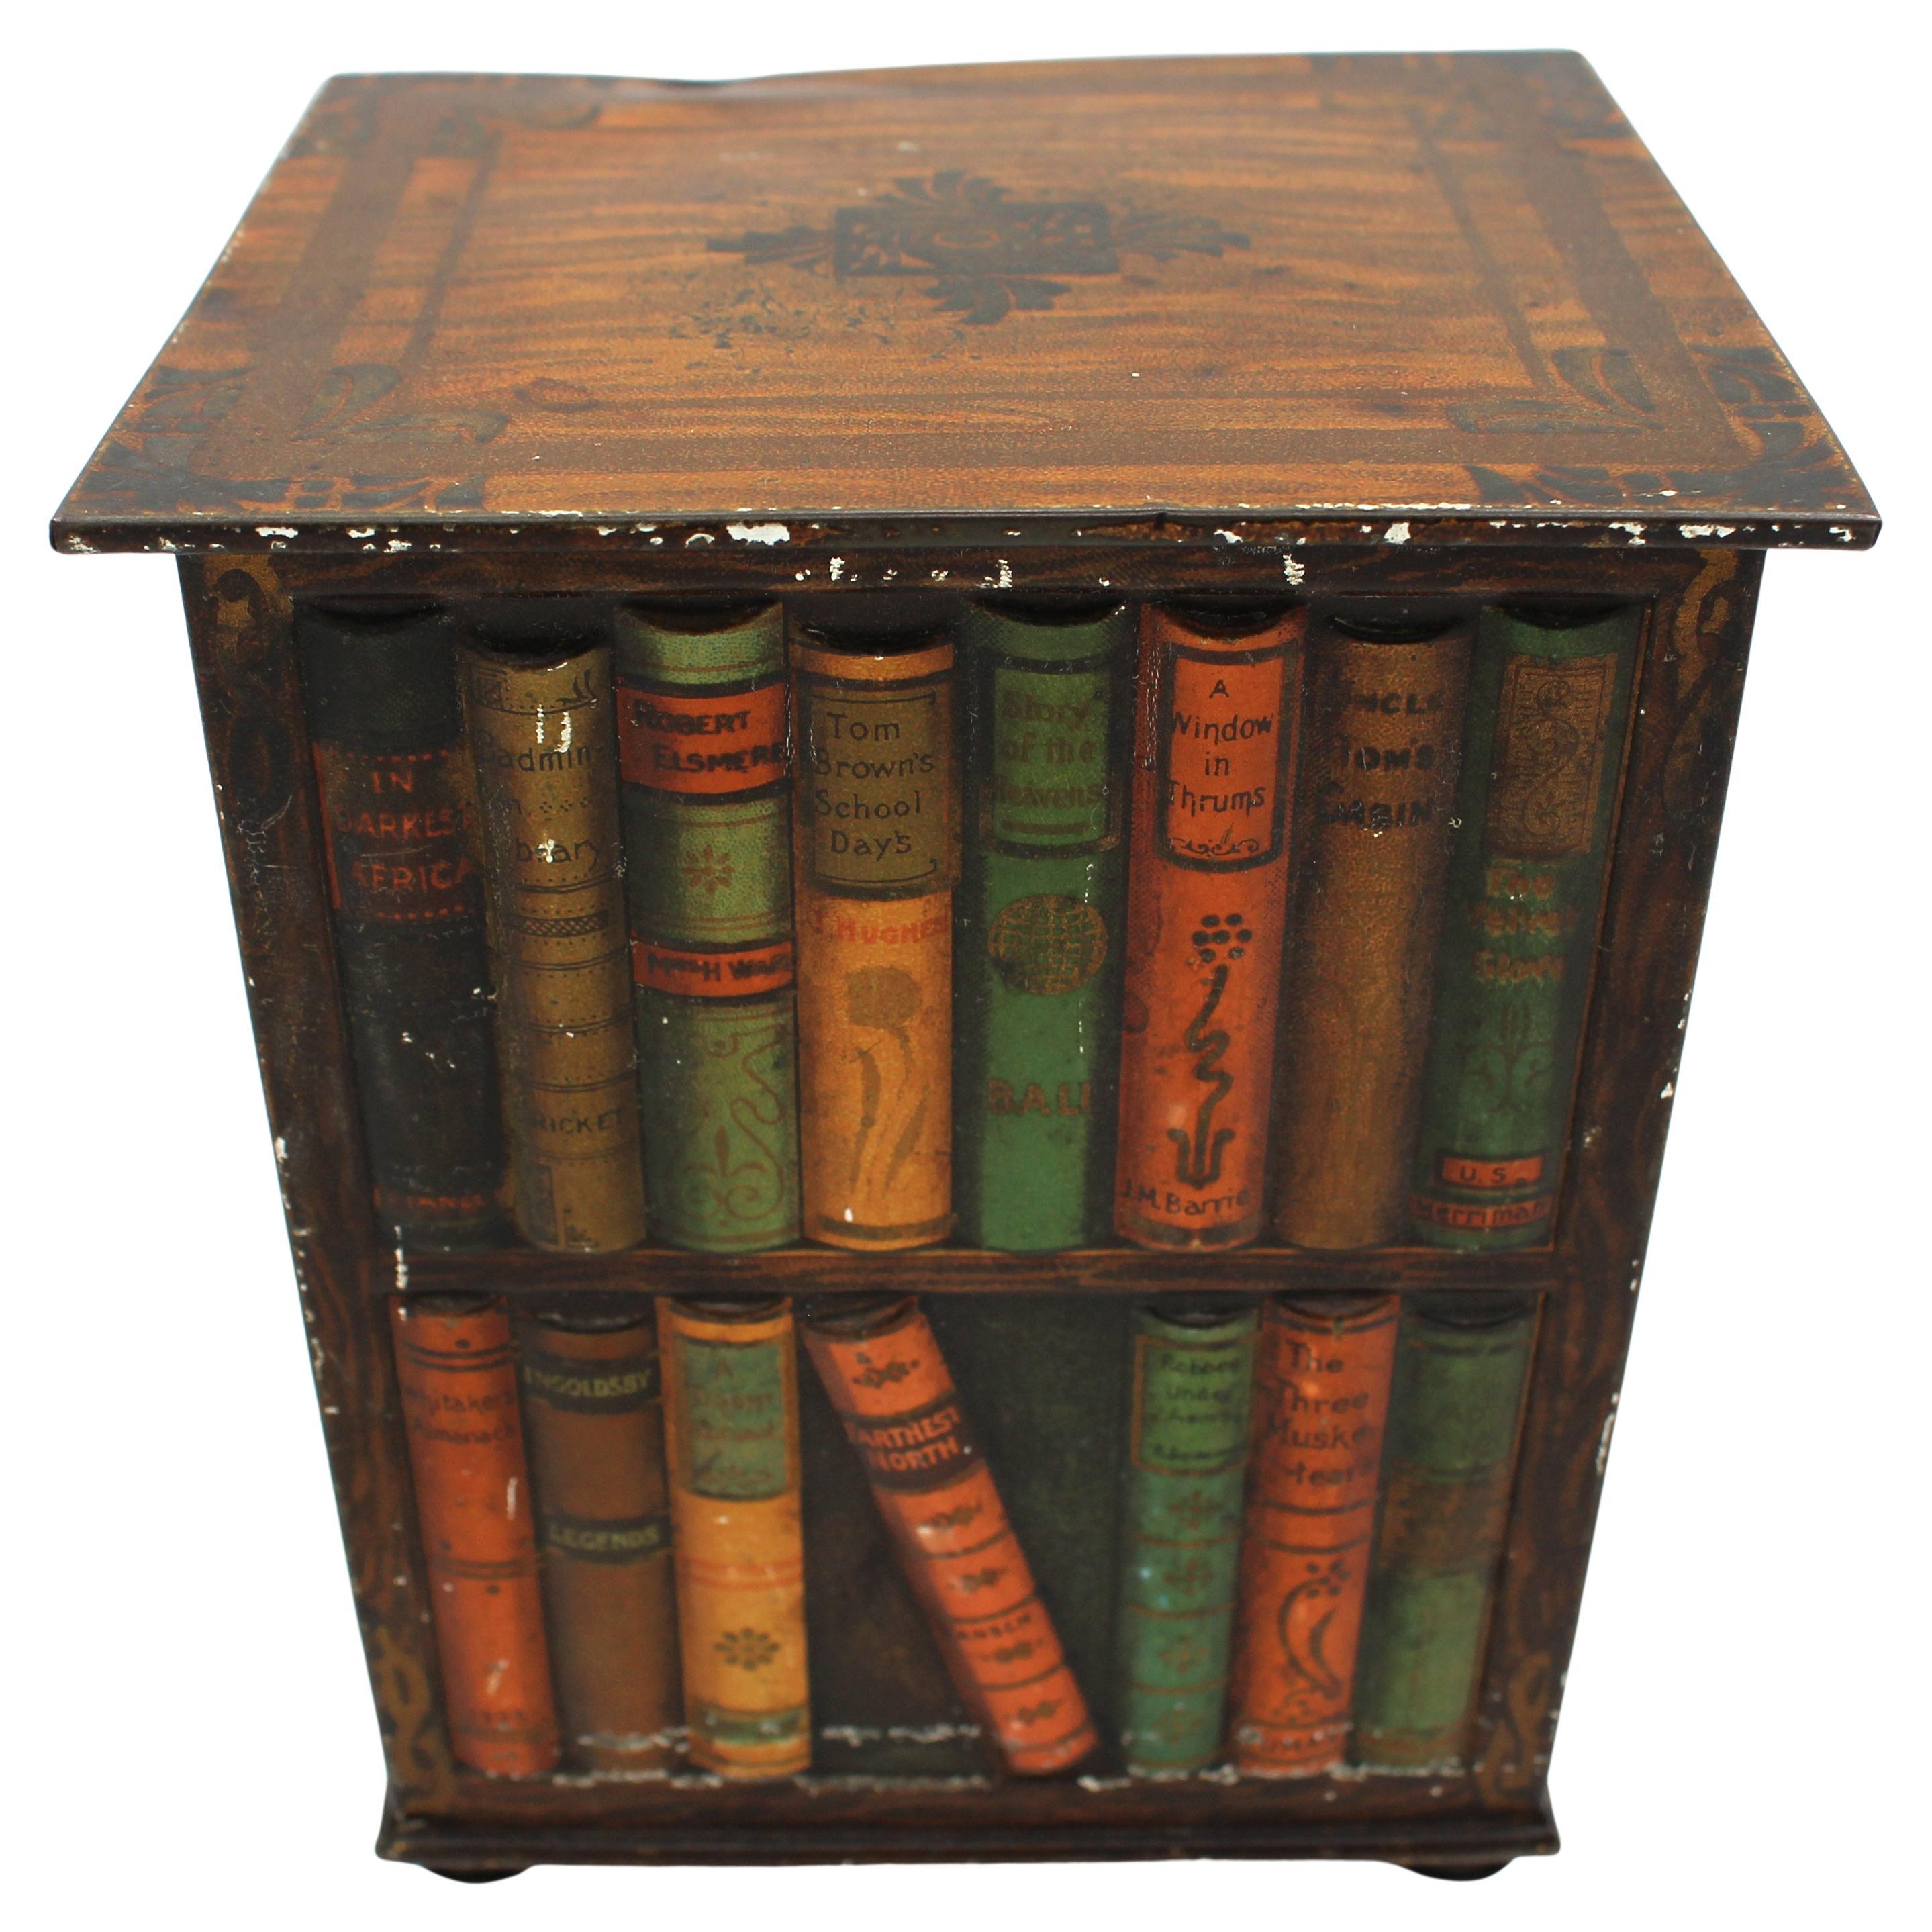 Faux Revolving Bookcase Biscuit Tin Box by Huntley & Palmers, 1905, English For Sale